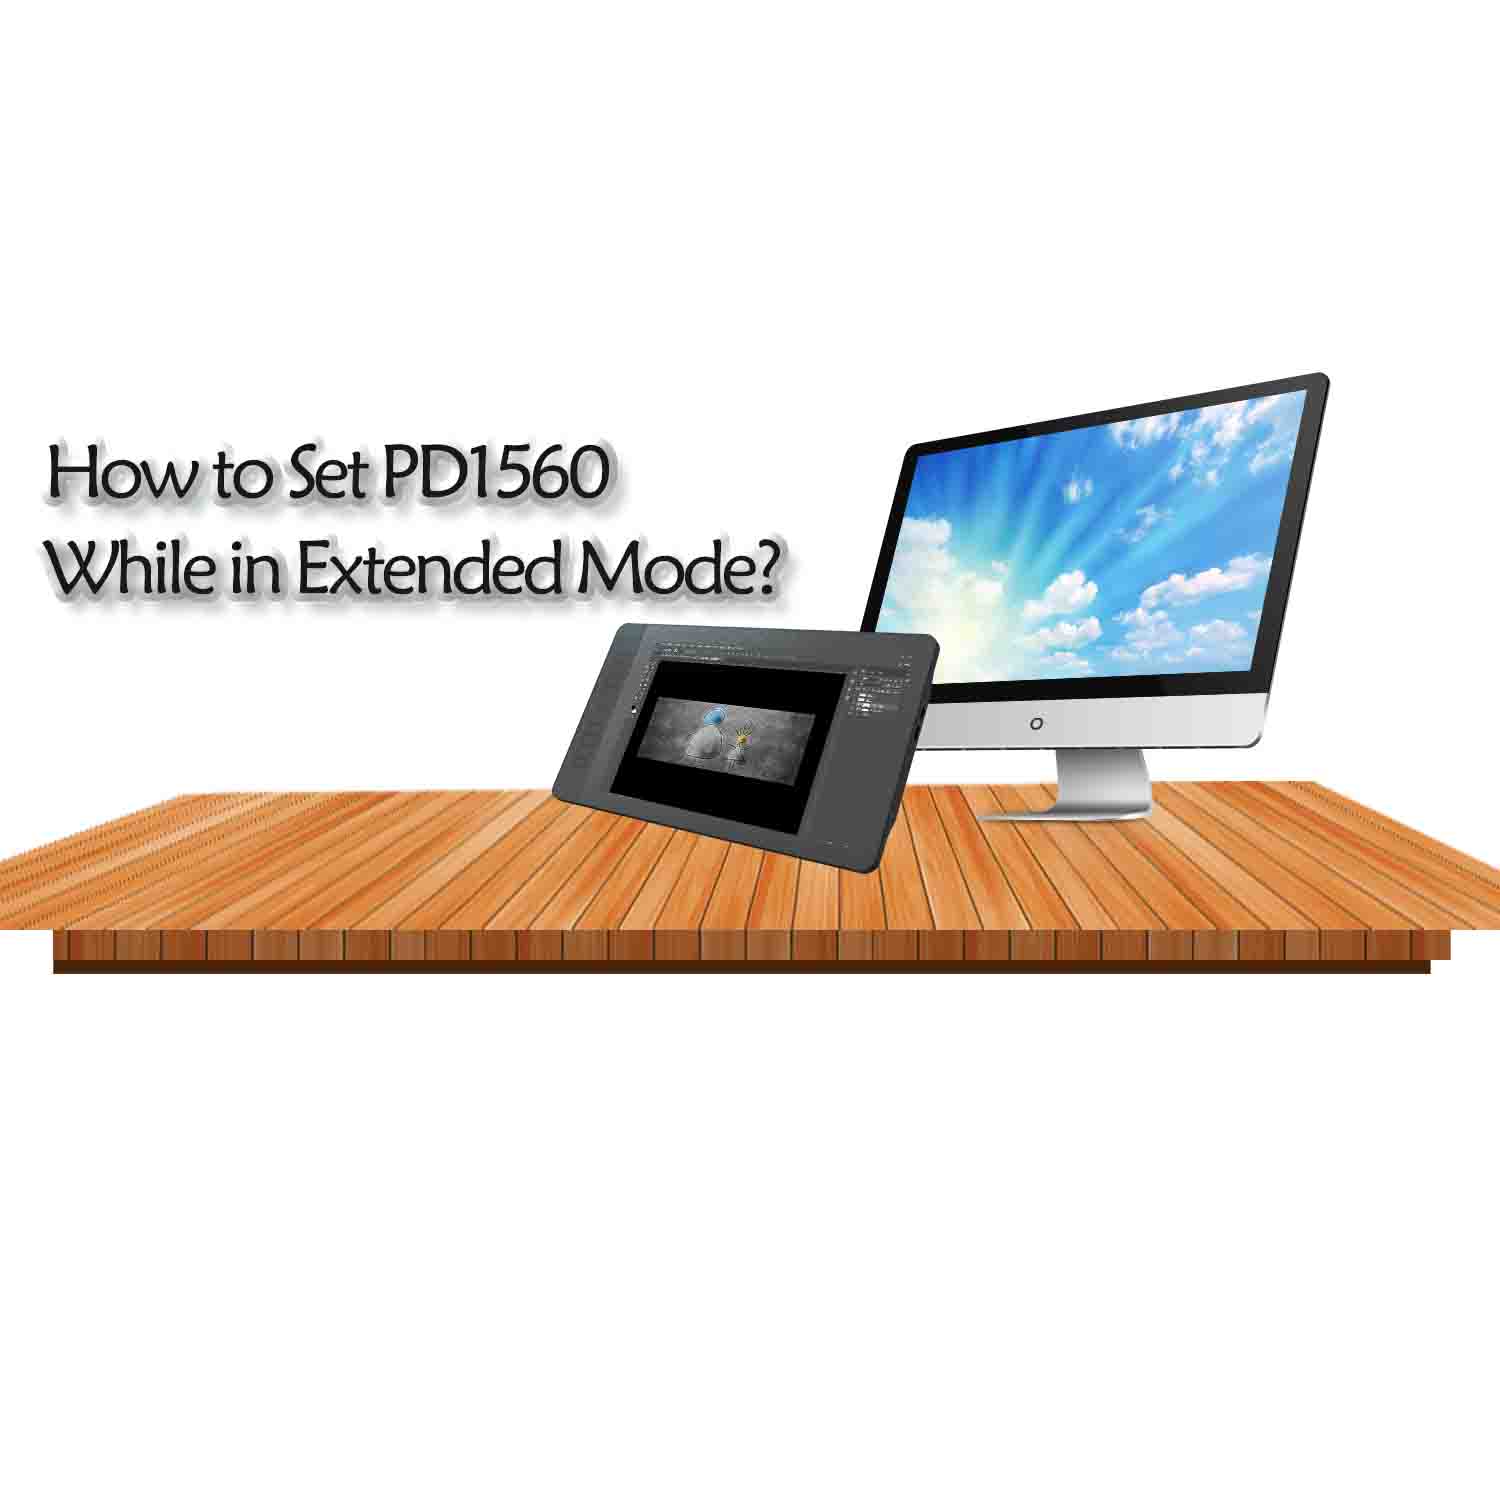 How to Set PD1560 in Extended Mode of Windows?